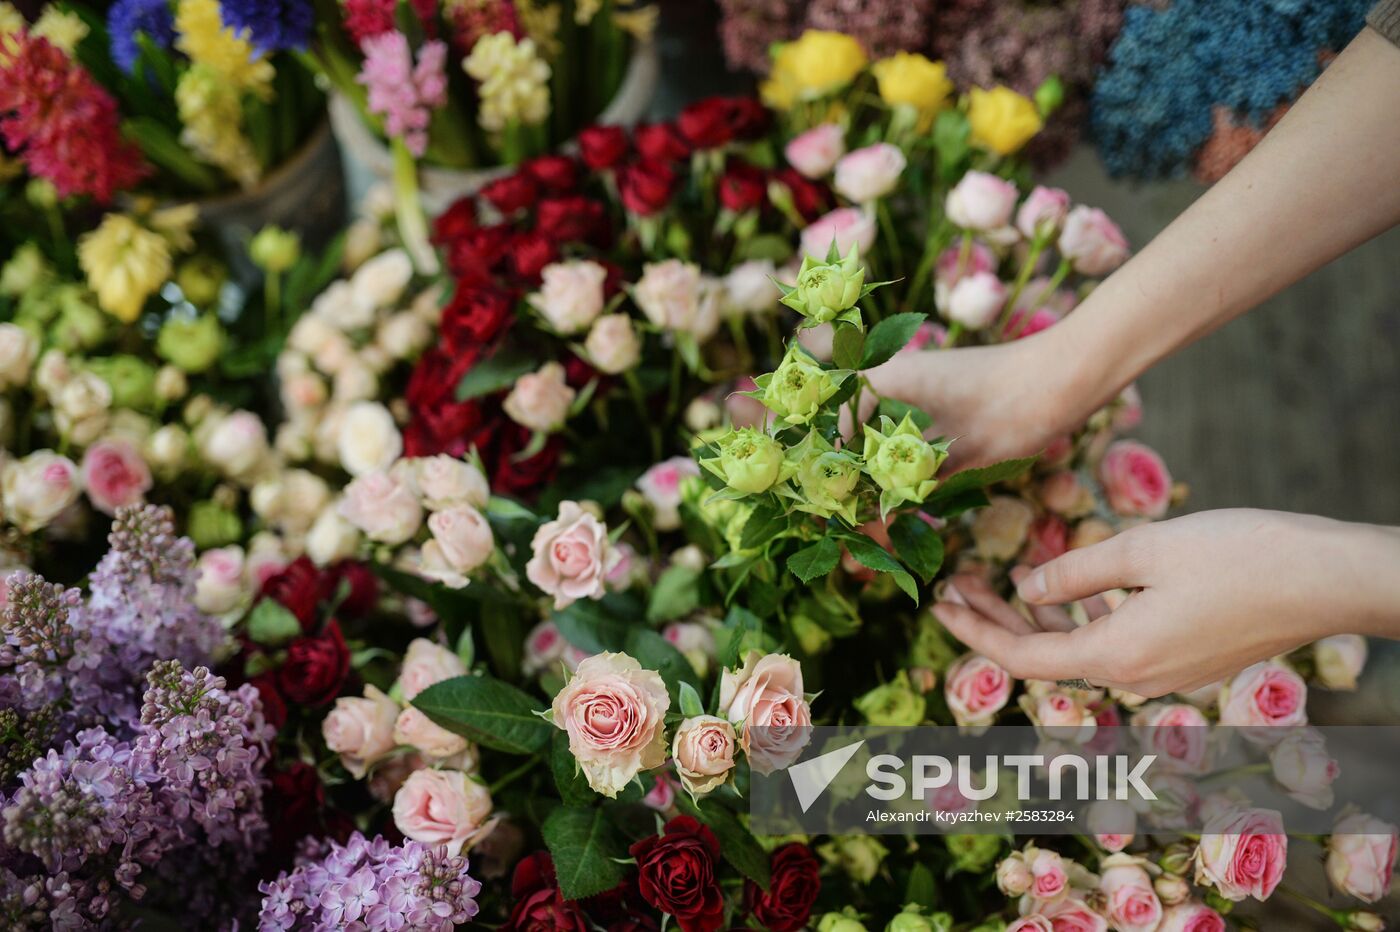 Flowers prepared for sale in Novosibirsk ahead of March 8